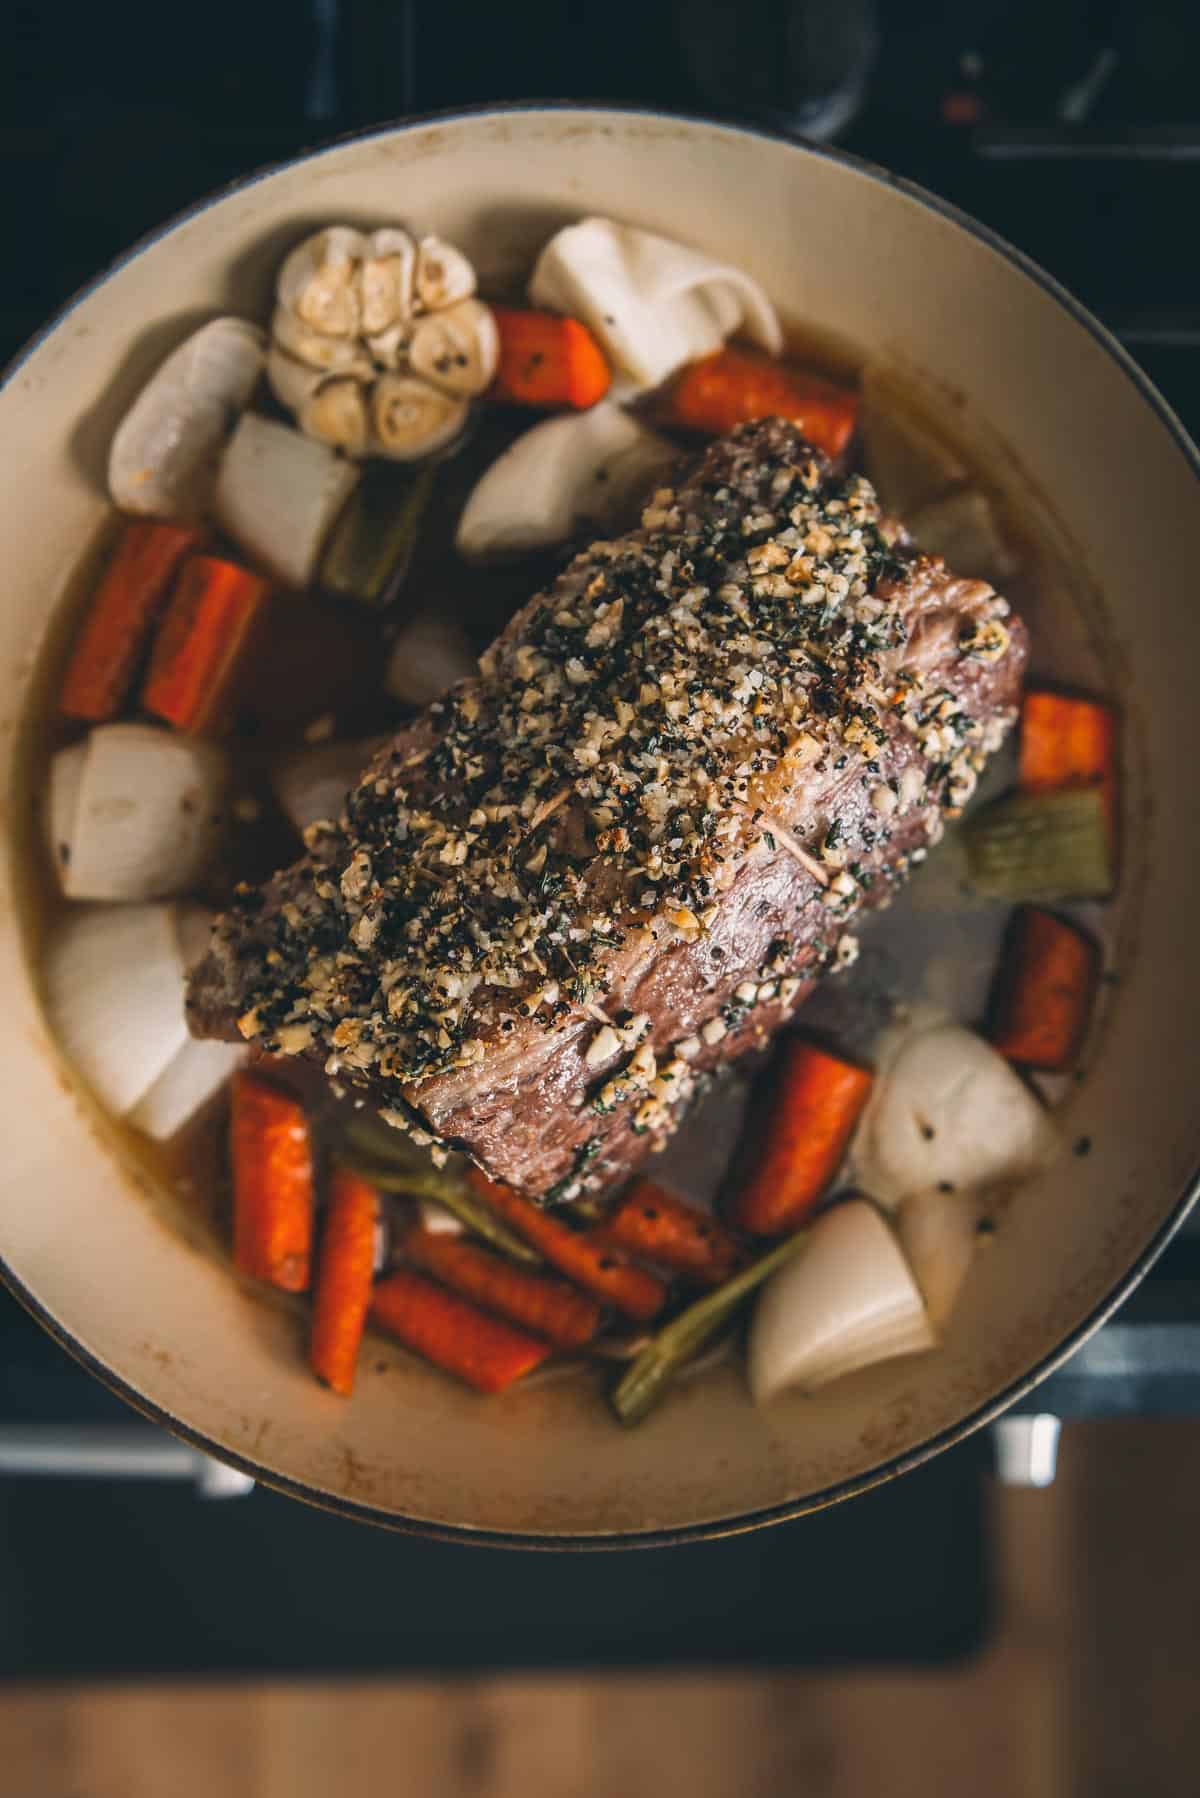 A Dutch oven full of meat and vegetables on a stove.